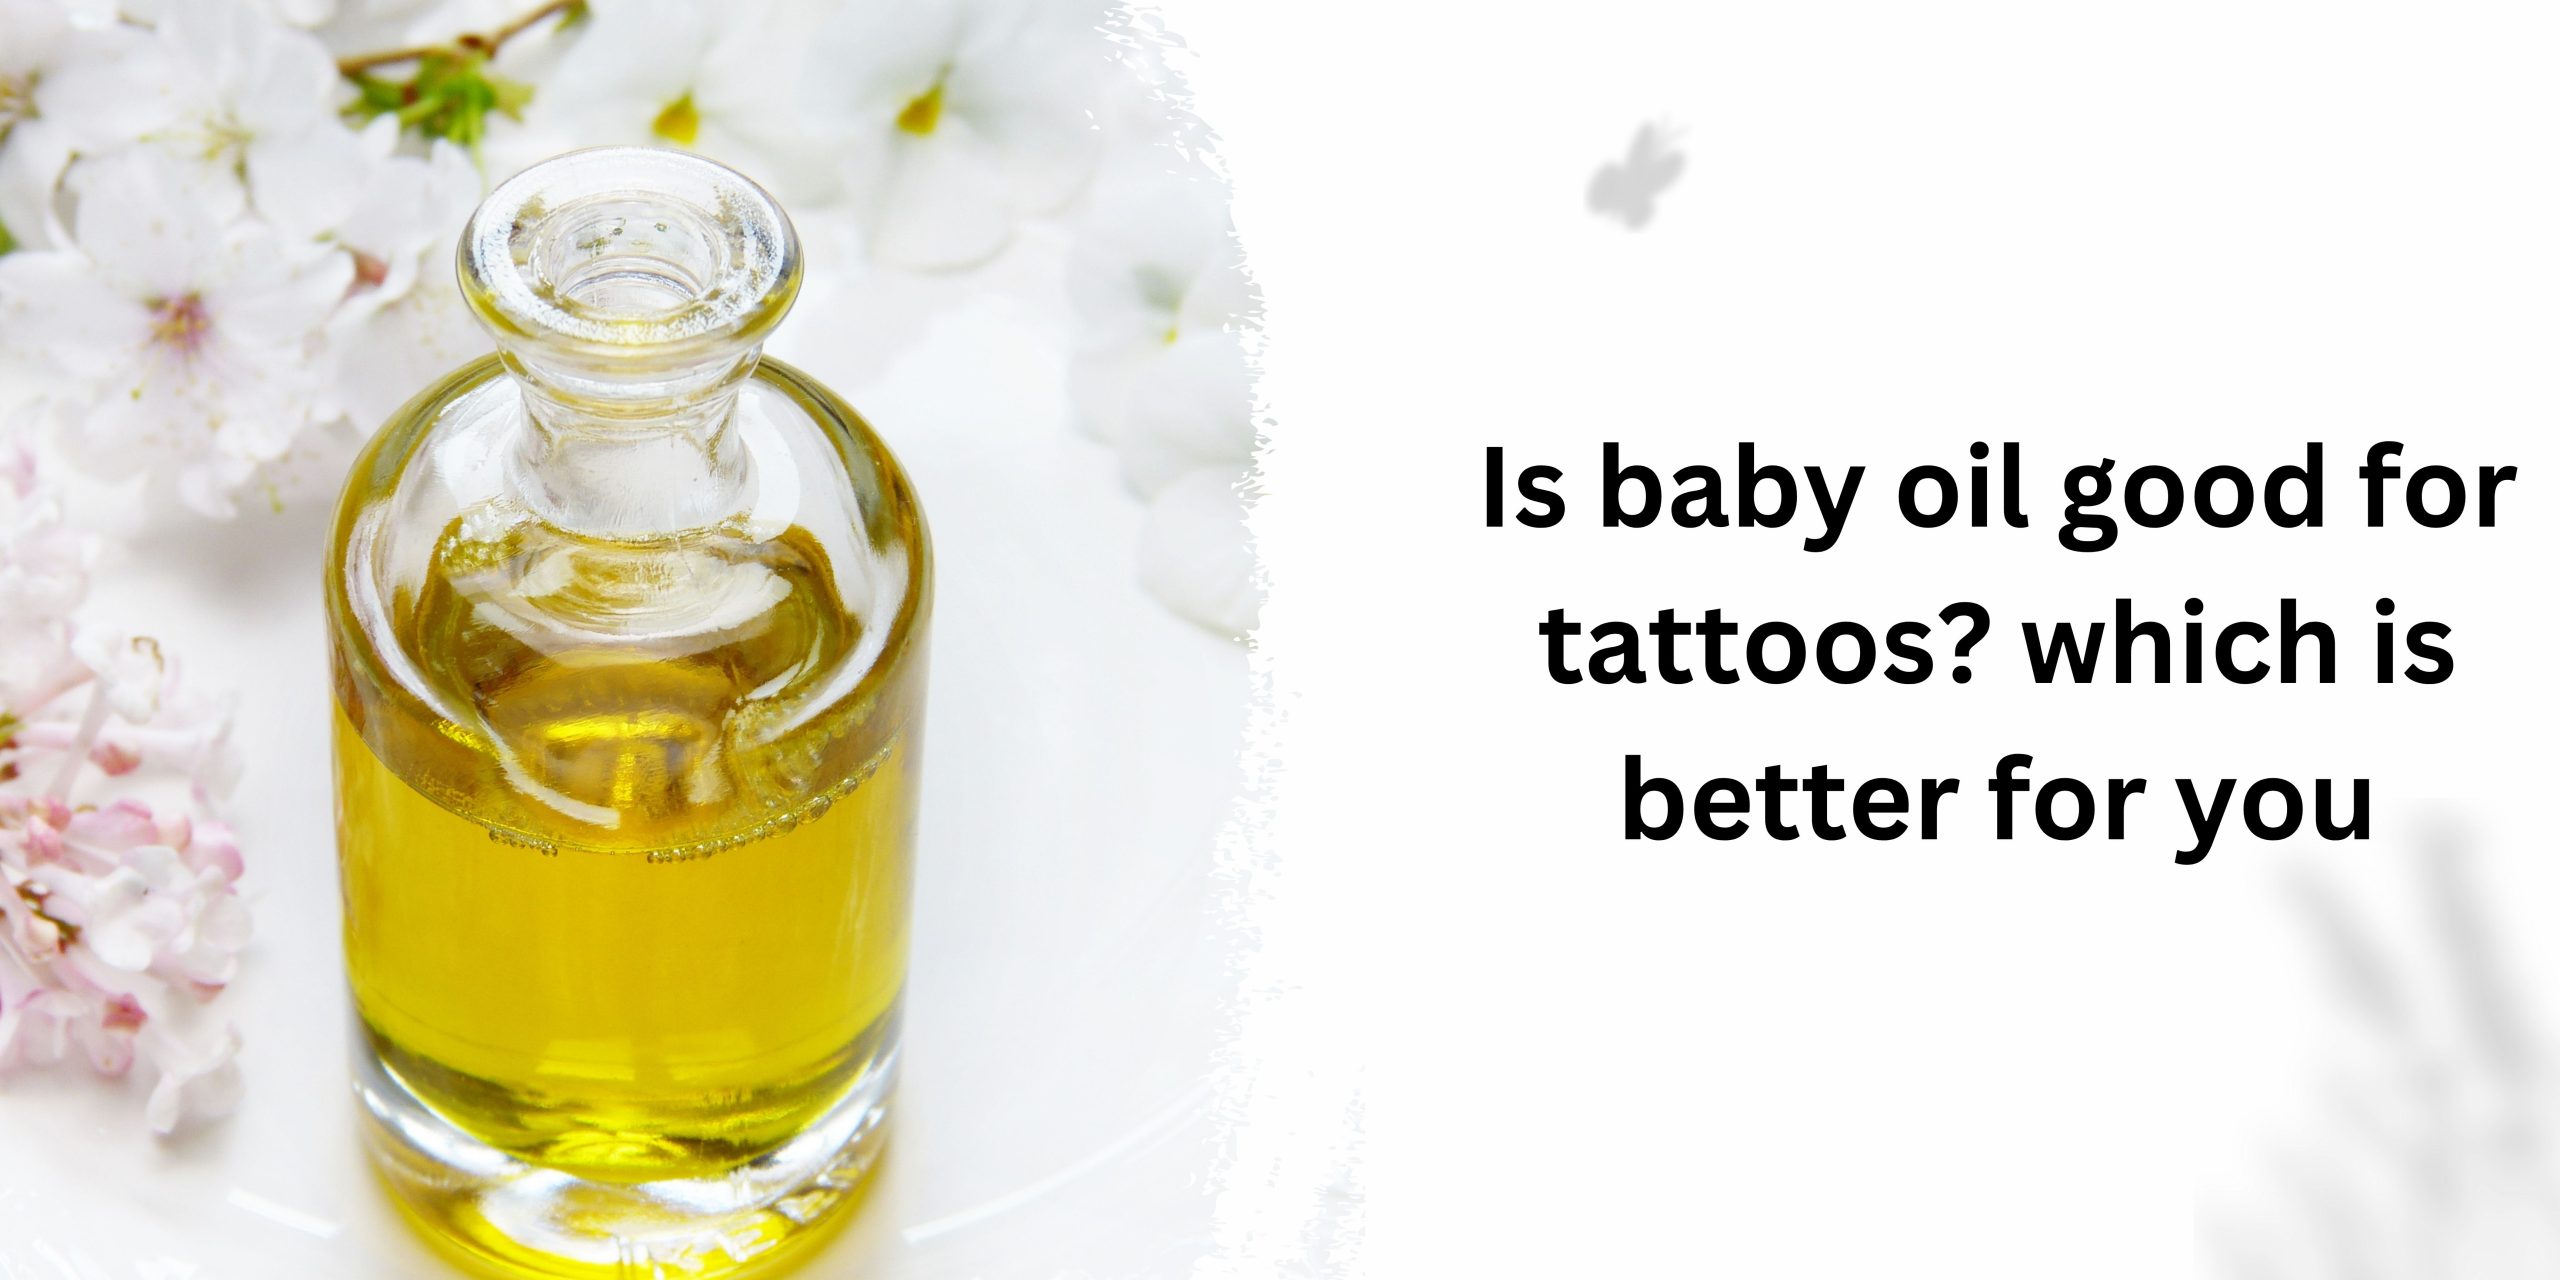 Is baby oil good for tattoos